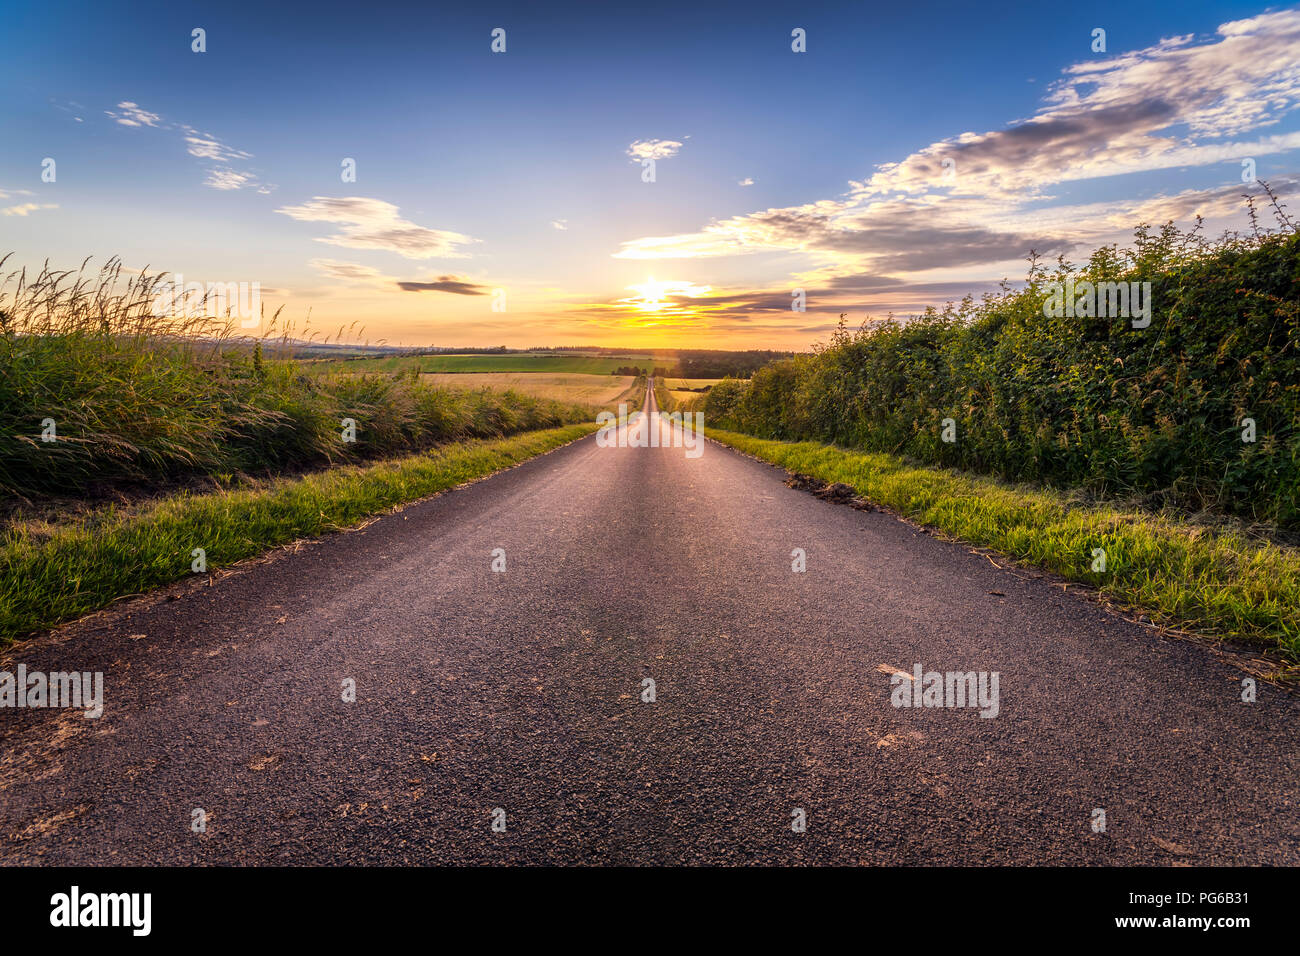 UK, Scotland, East Lothian, hedgerow linded country road at sunset Stock Photo